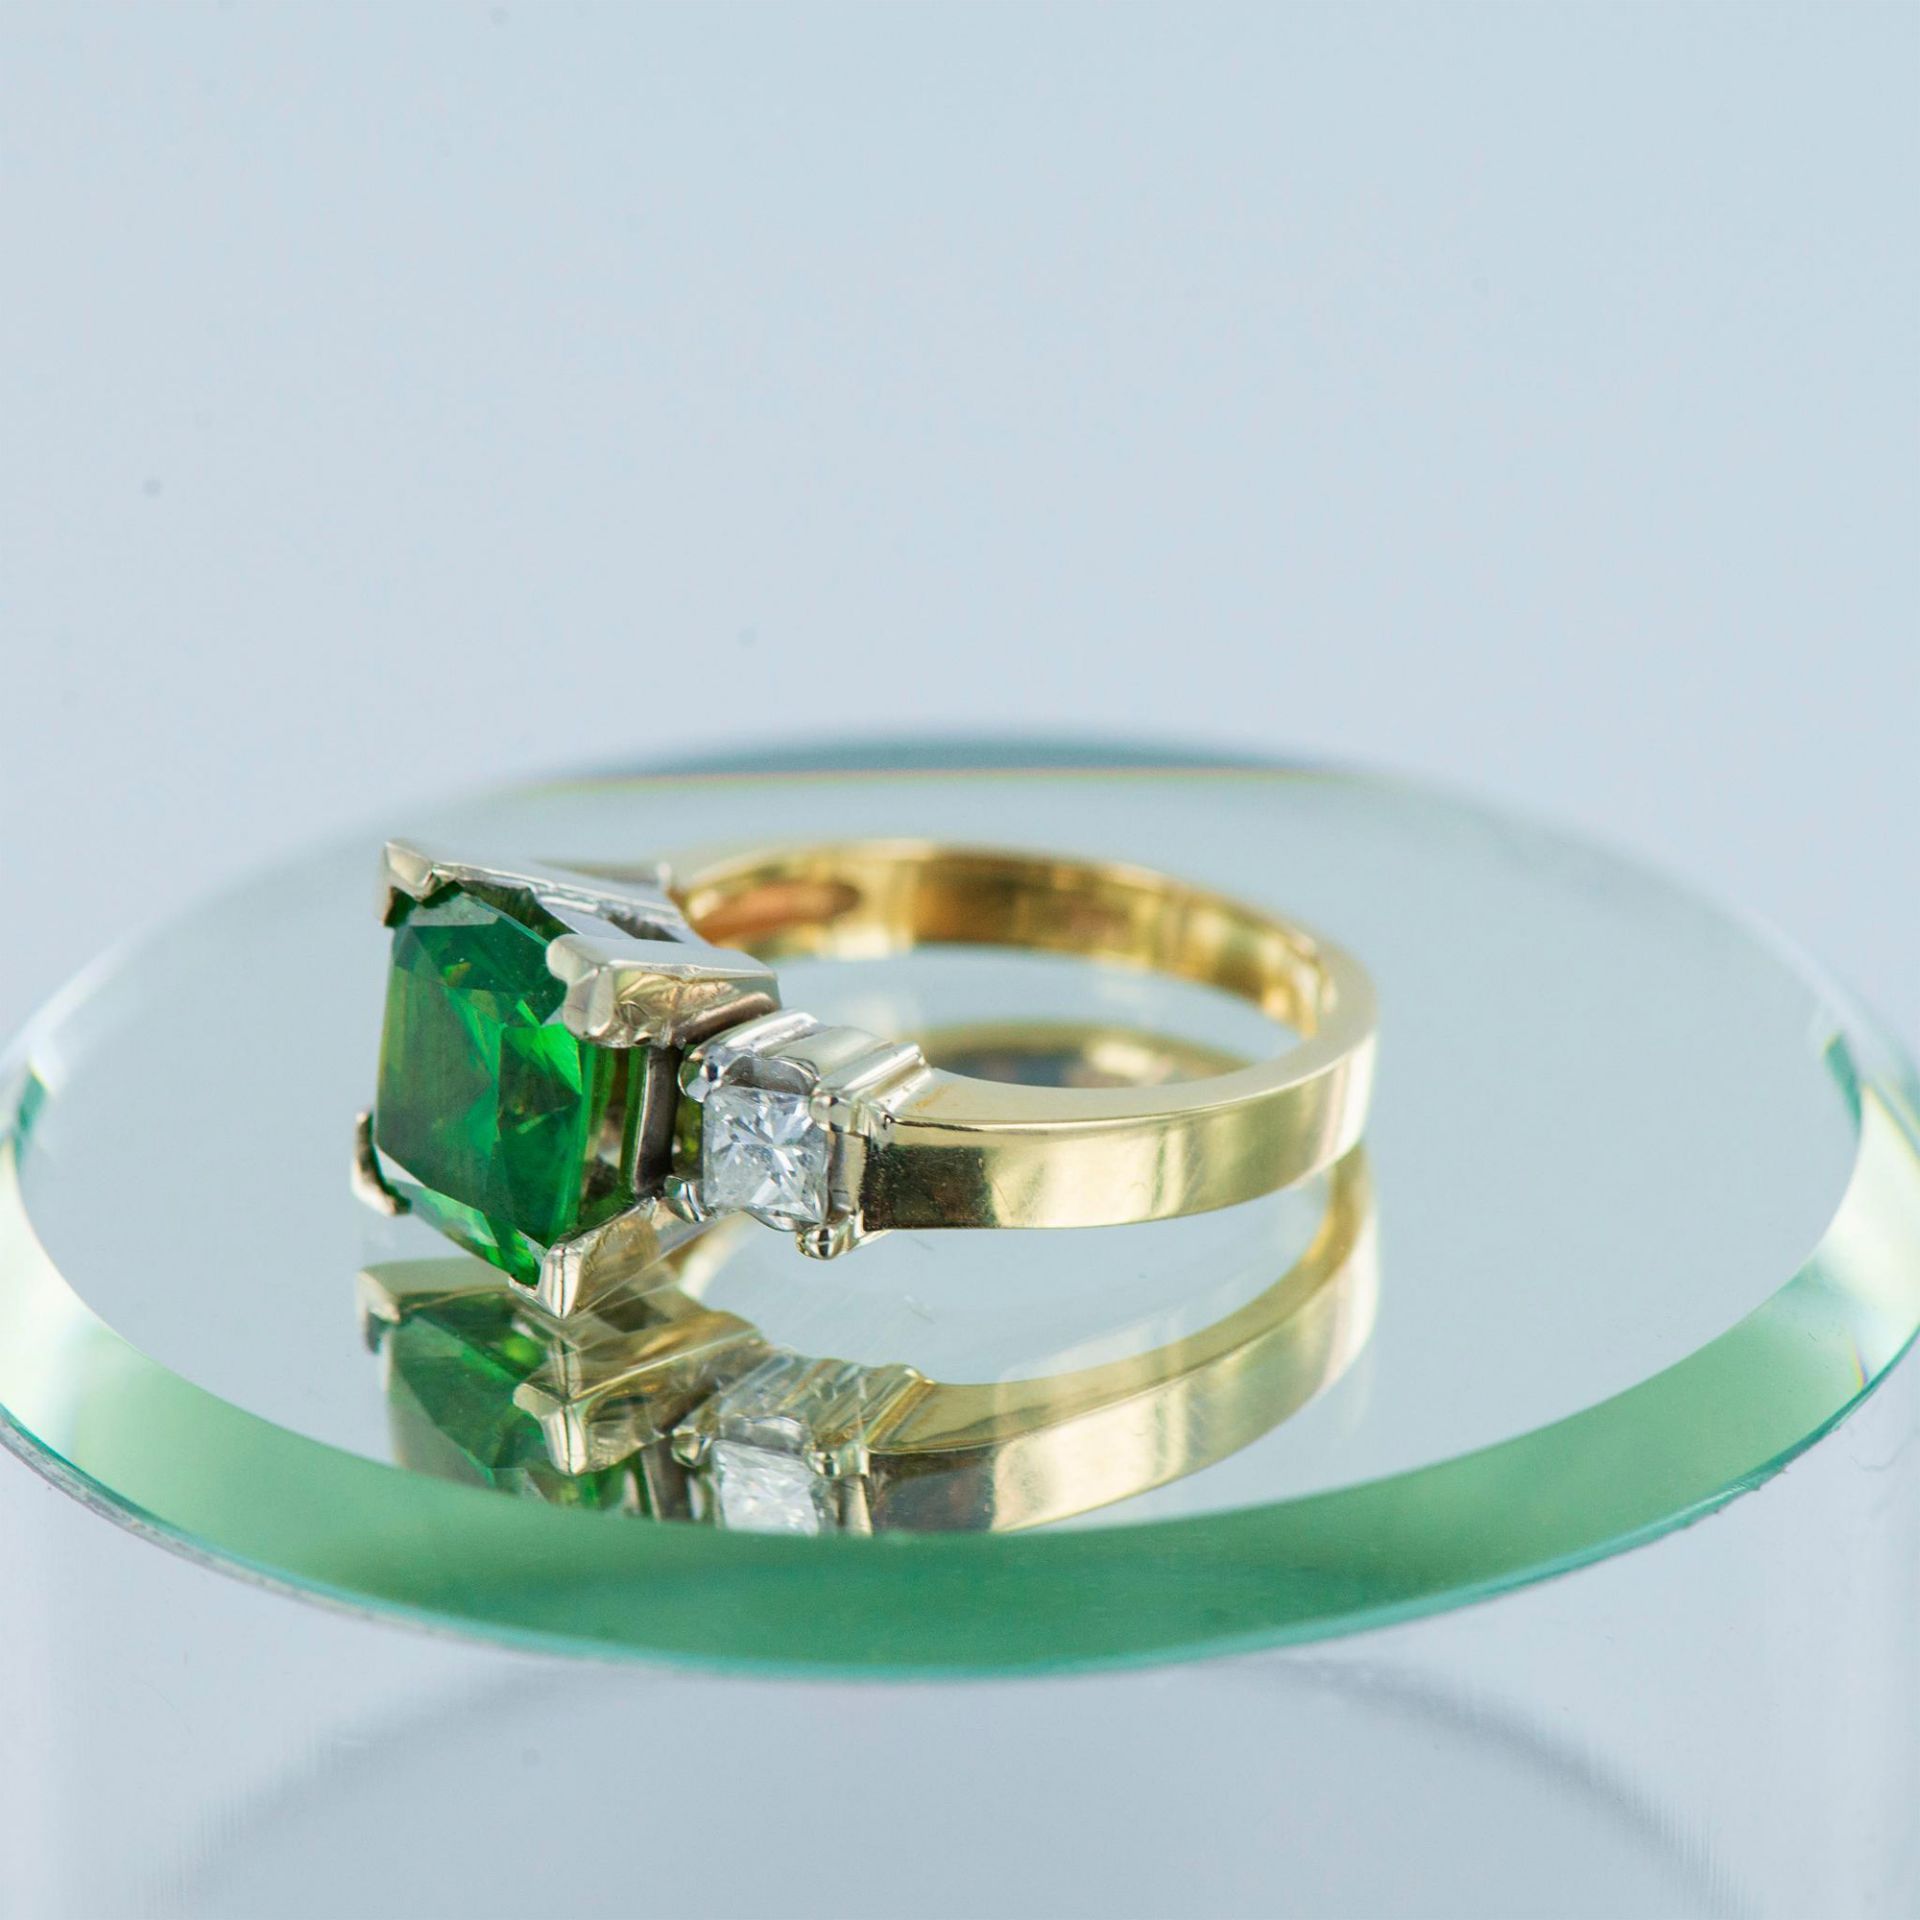 Pretty Two Tone 14K Gold, Emerald and Diamond Ring - Image 2 of 12